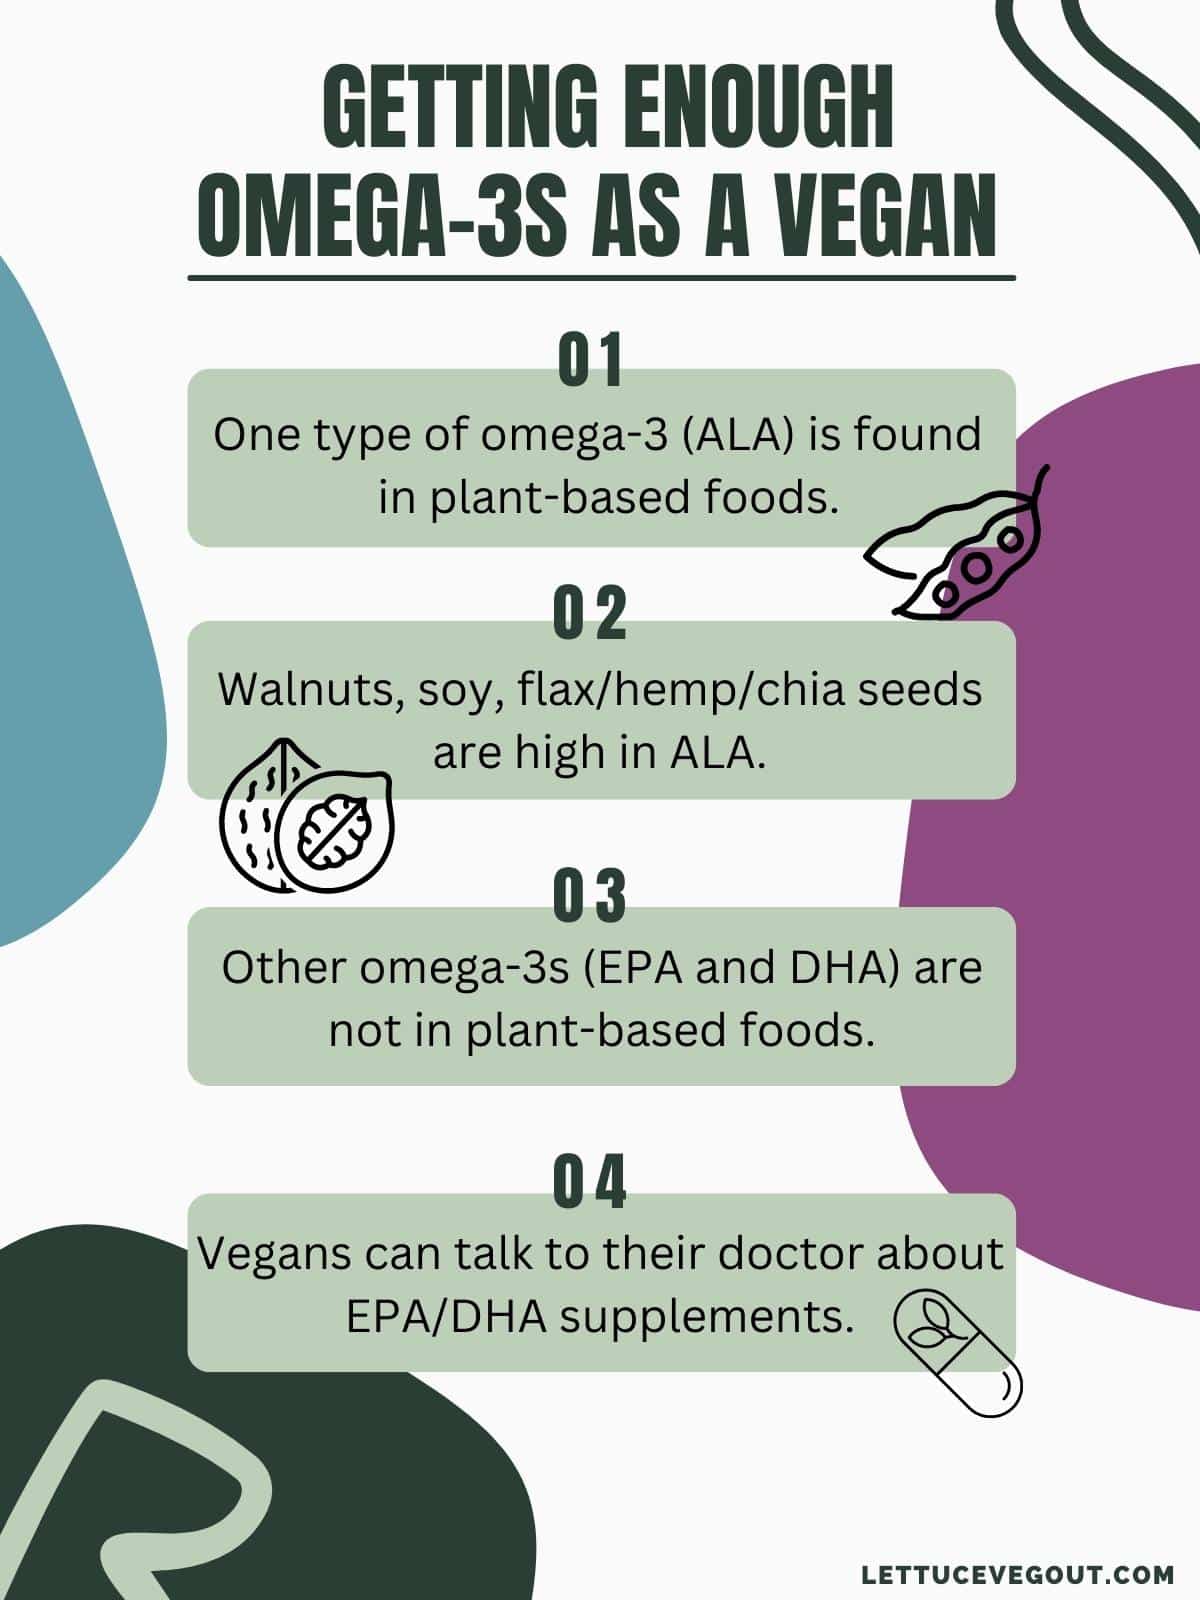 Infographic with 4 tips on how to get enough omega-3 as a vegan.